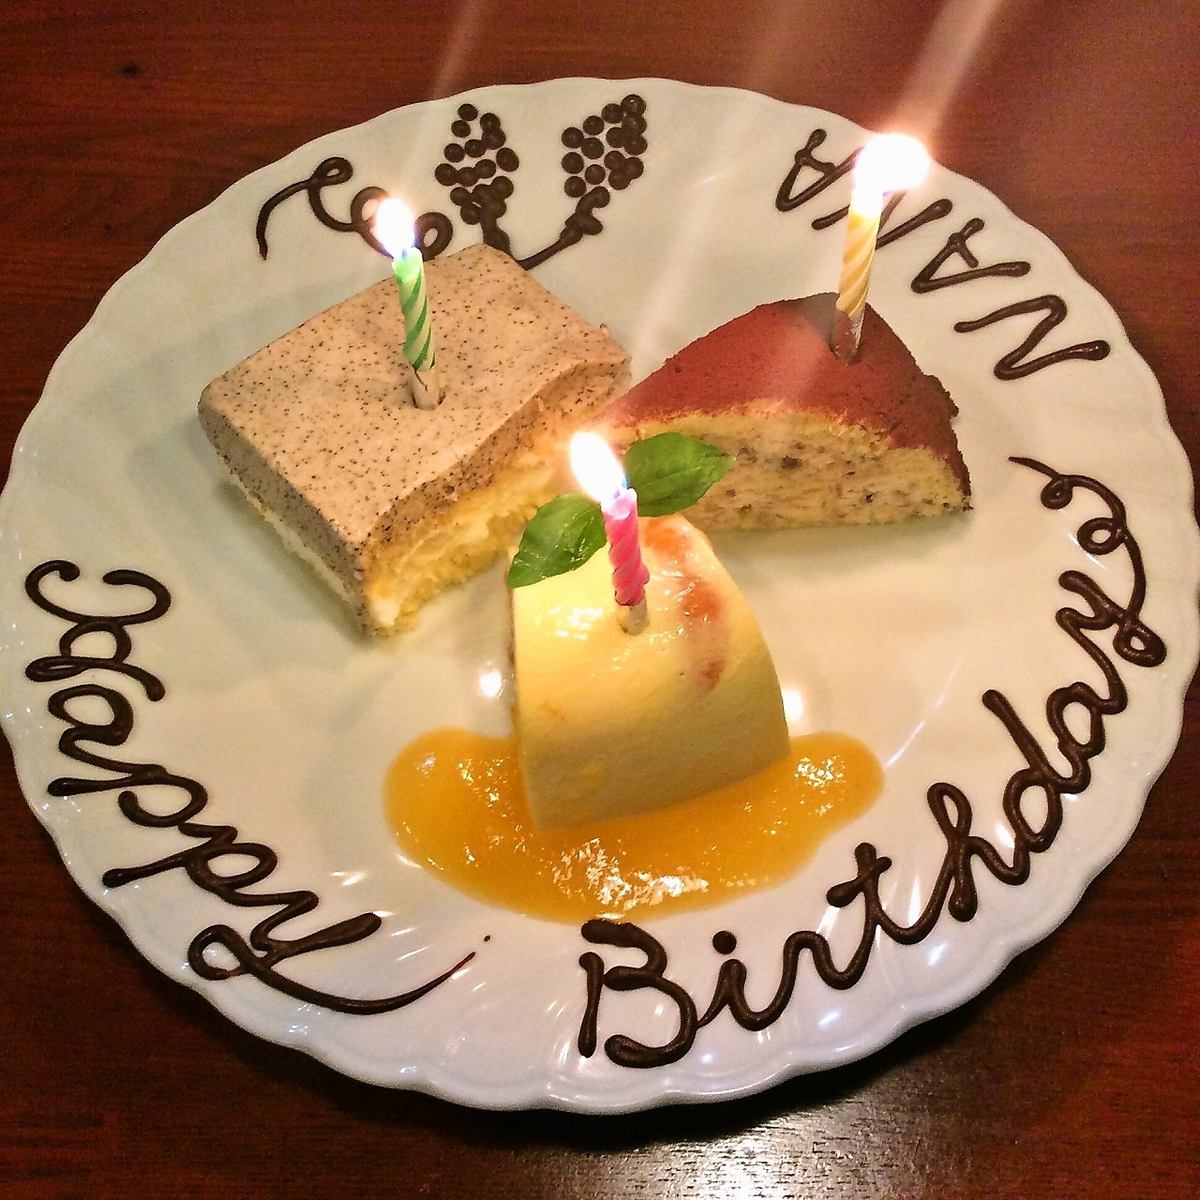 For celebrations, we will prepare a dessert plate with your name ♪